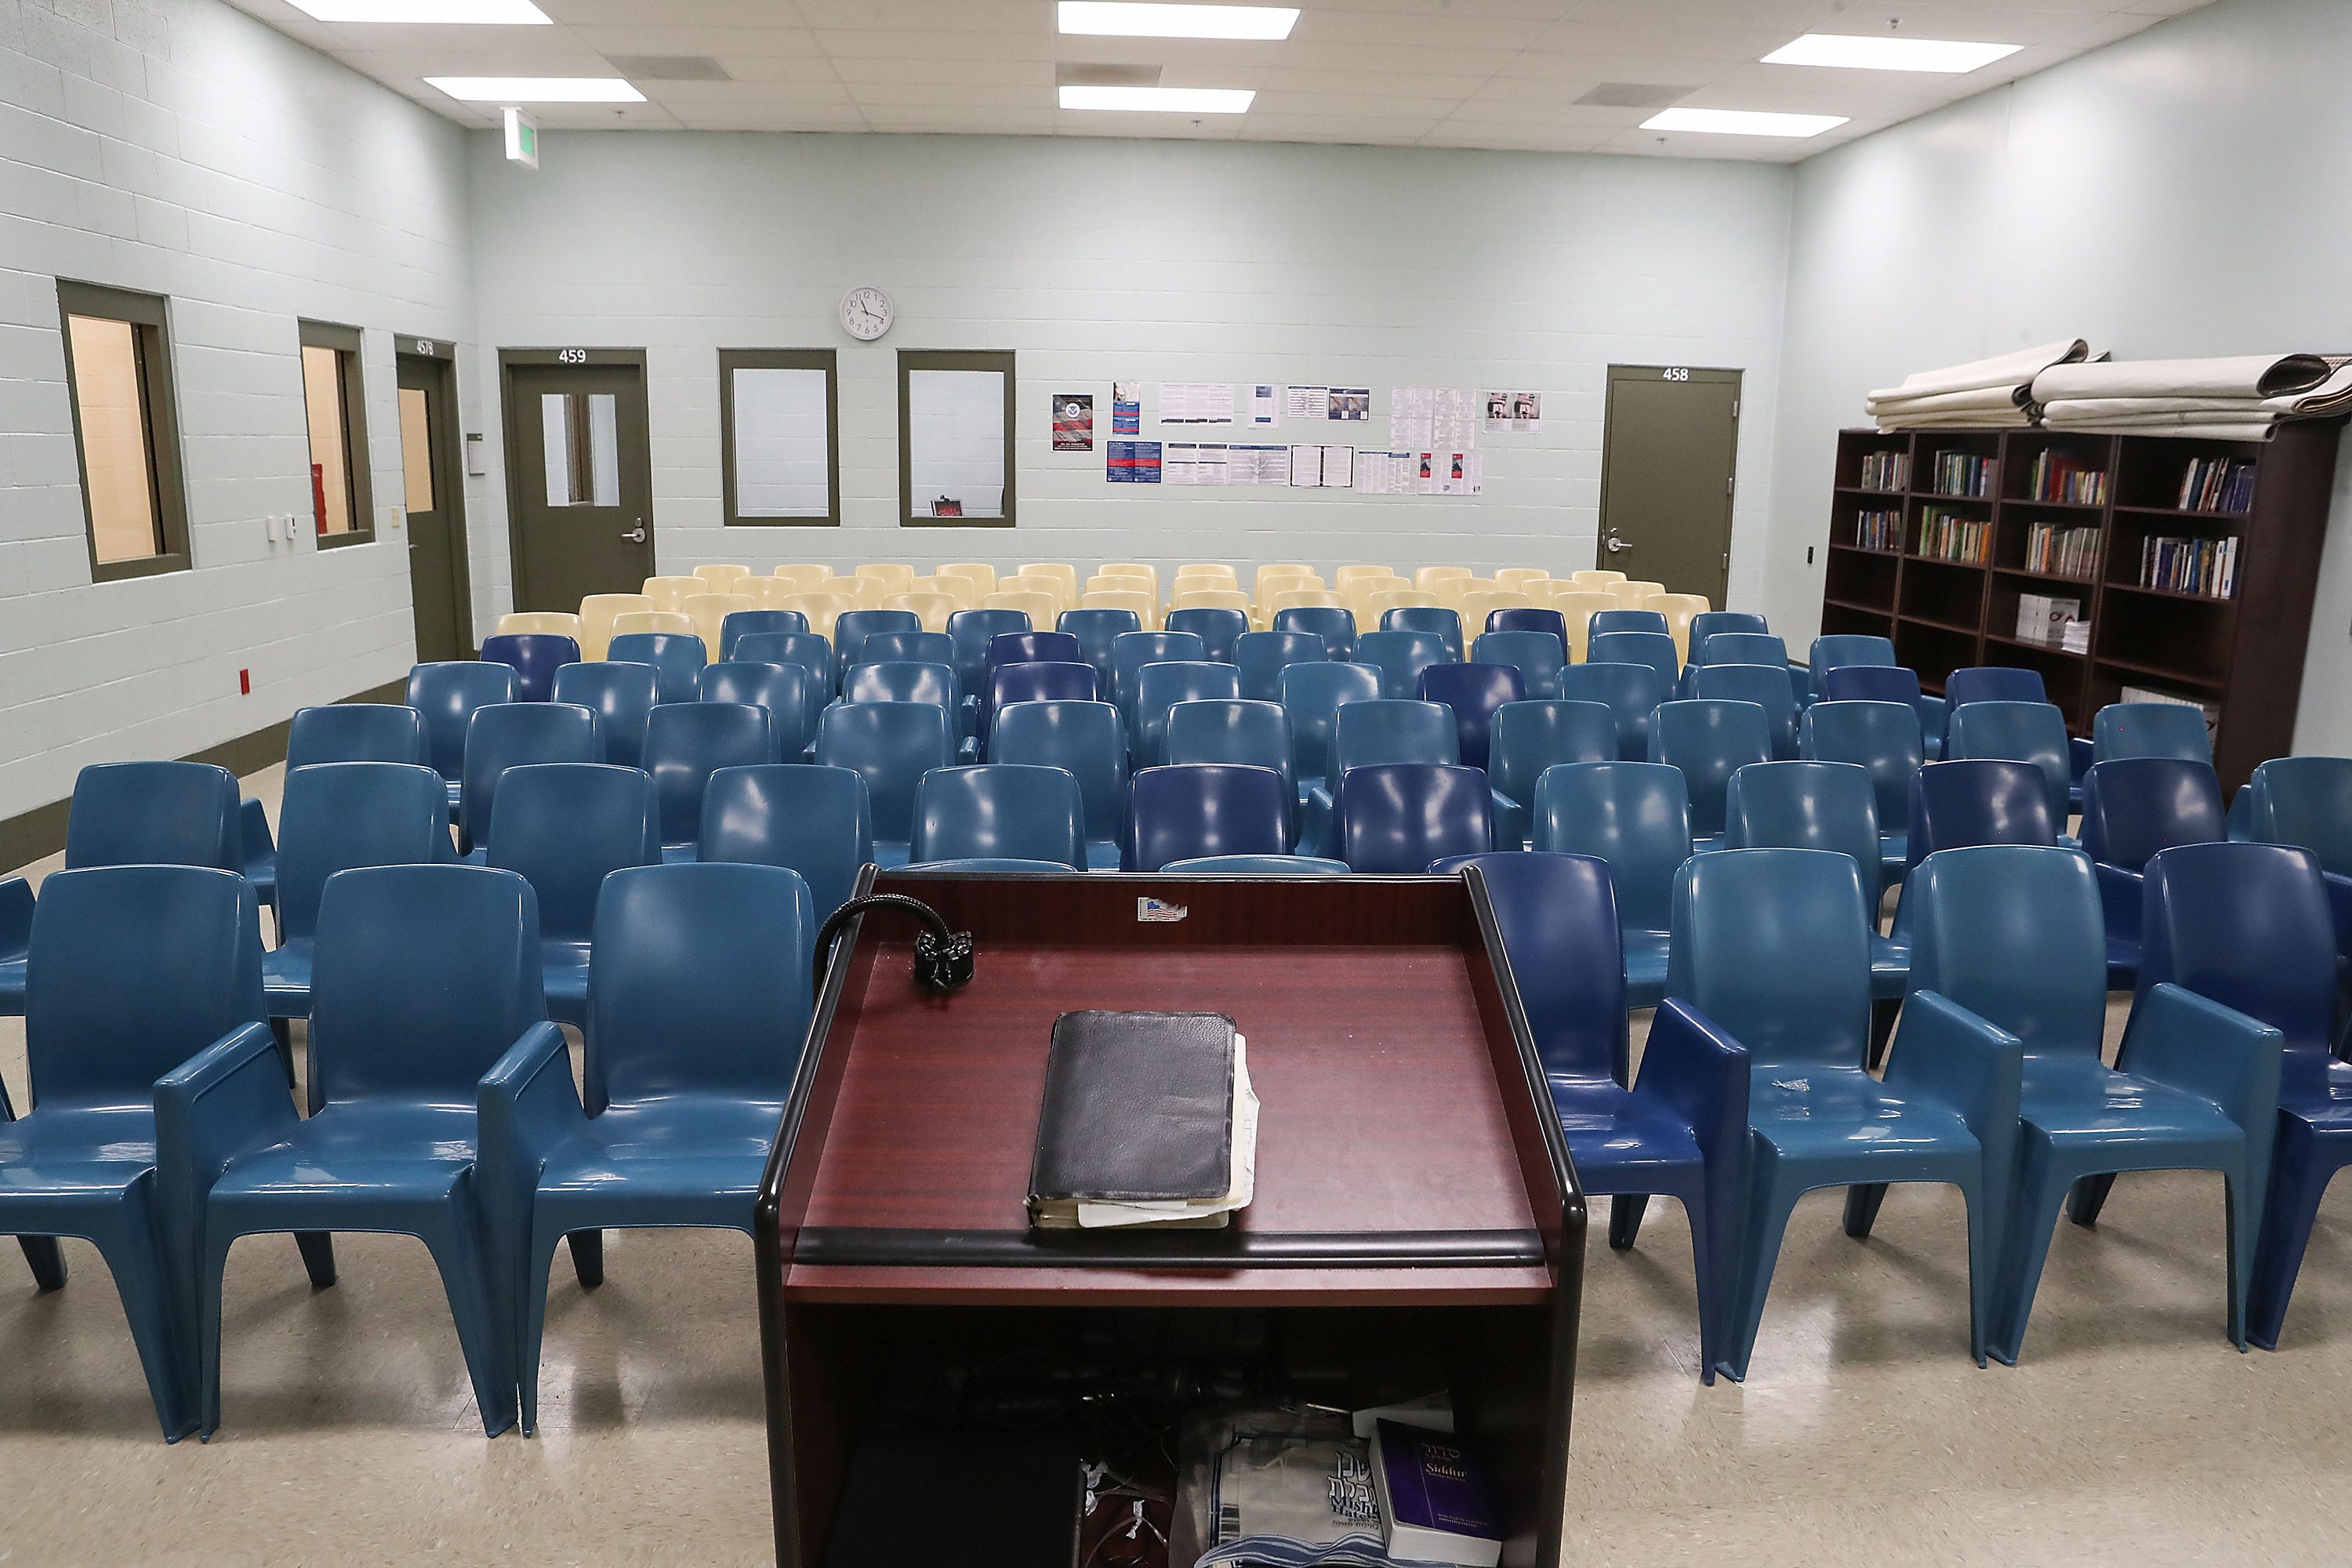 The U.S. Immigration and Customs Enforcement's processing center in Adelanto, Calif., includes a chapel.